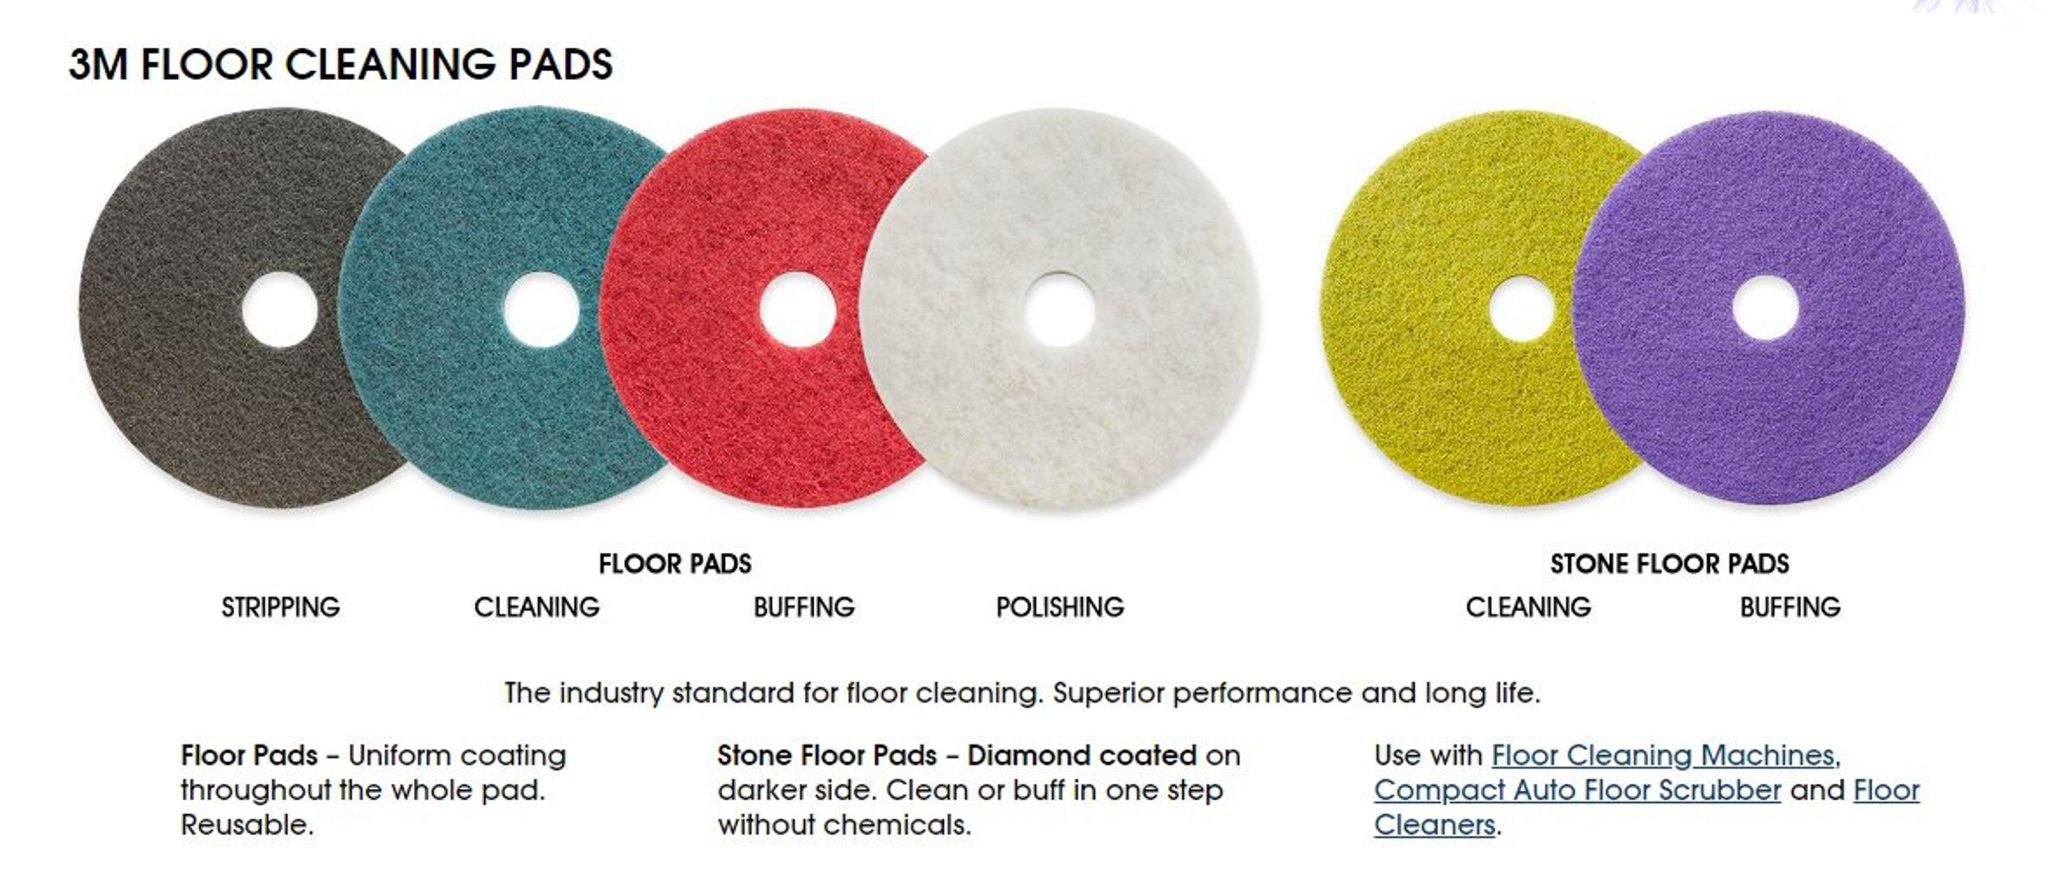 3M CLEANING GREEN PAD Yeg Epoxy supplies